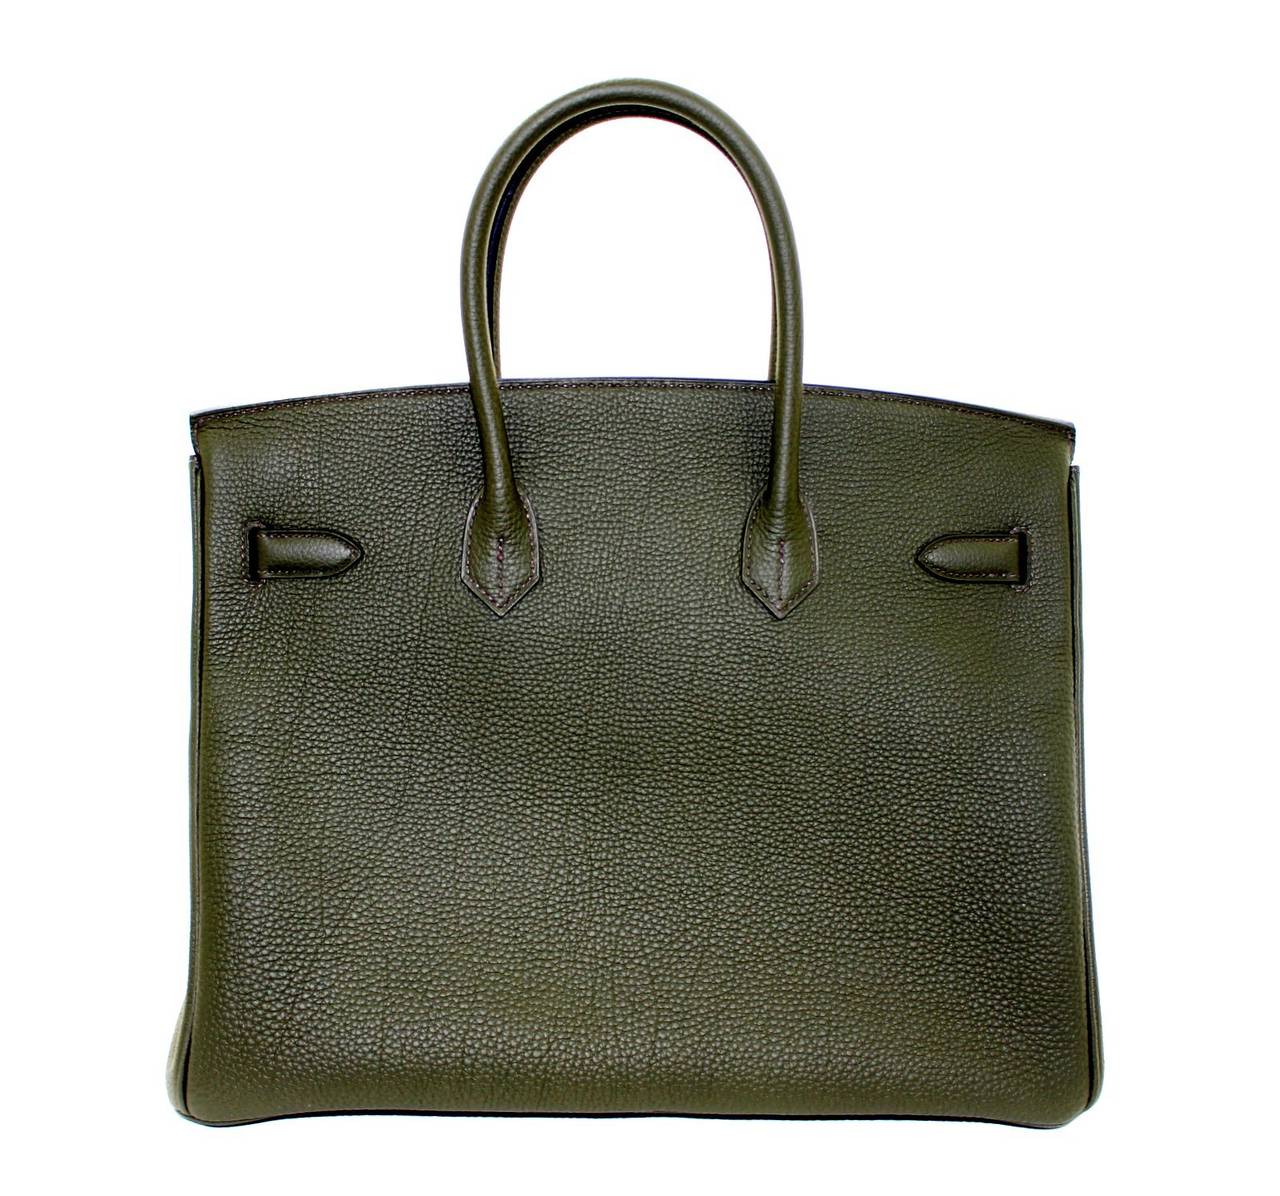 Pristine and never carried, this Hermès Vert Olive 35 cm Birkin Bag has been carefully stored with the protective plastic intact on the hardware.   Considered the ultimate luxury item the world over and hand stitched by skilled craftsmen, wait